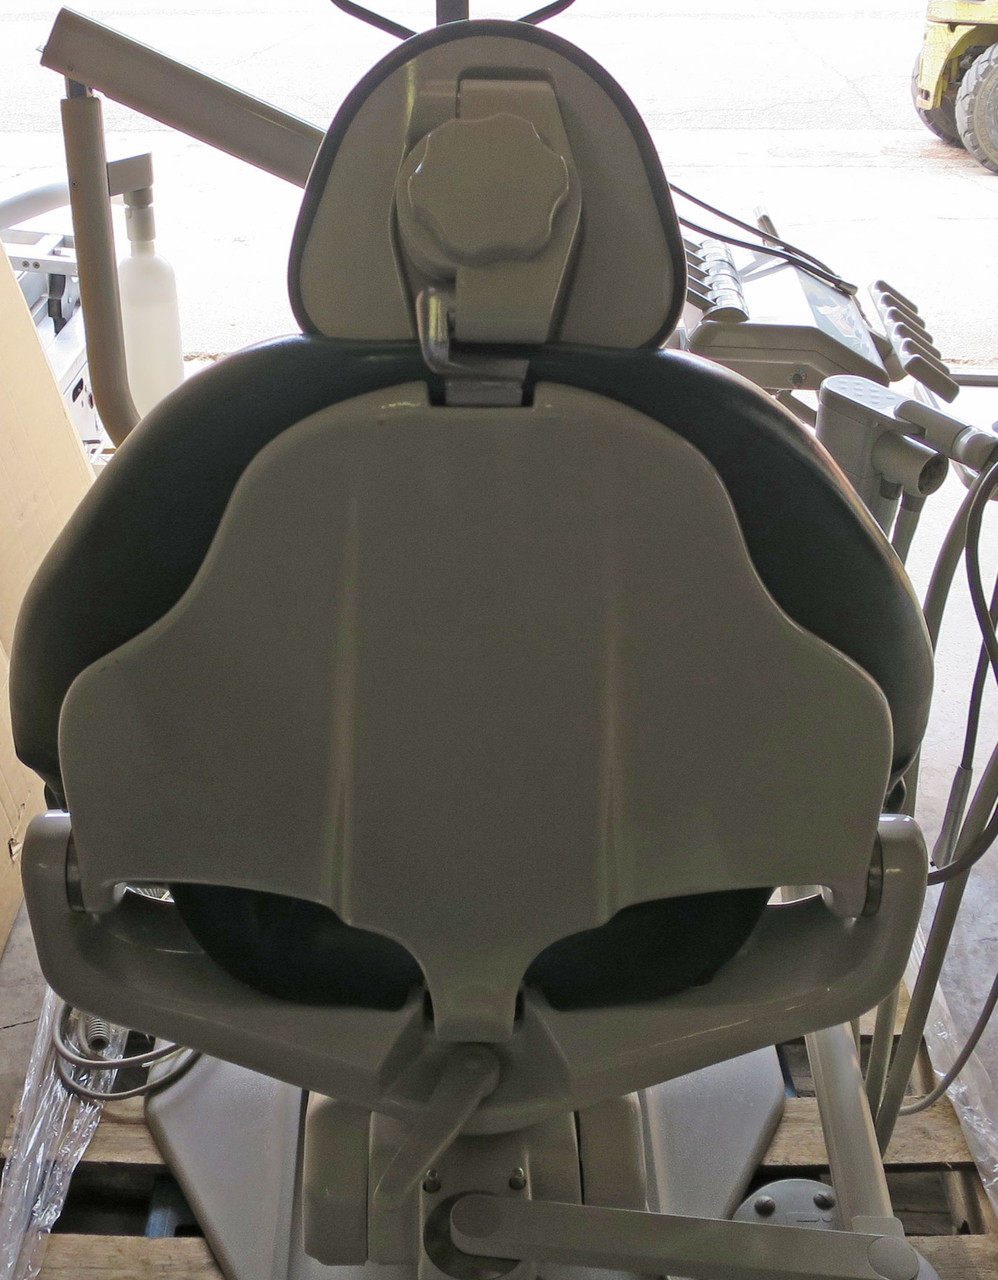 Adec Cascade Dental Chair w/ Adec 7115 Operatory / Assistant's Arms